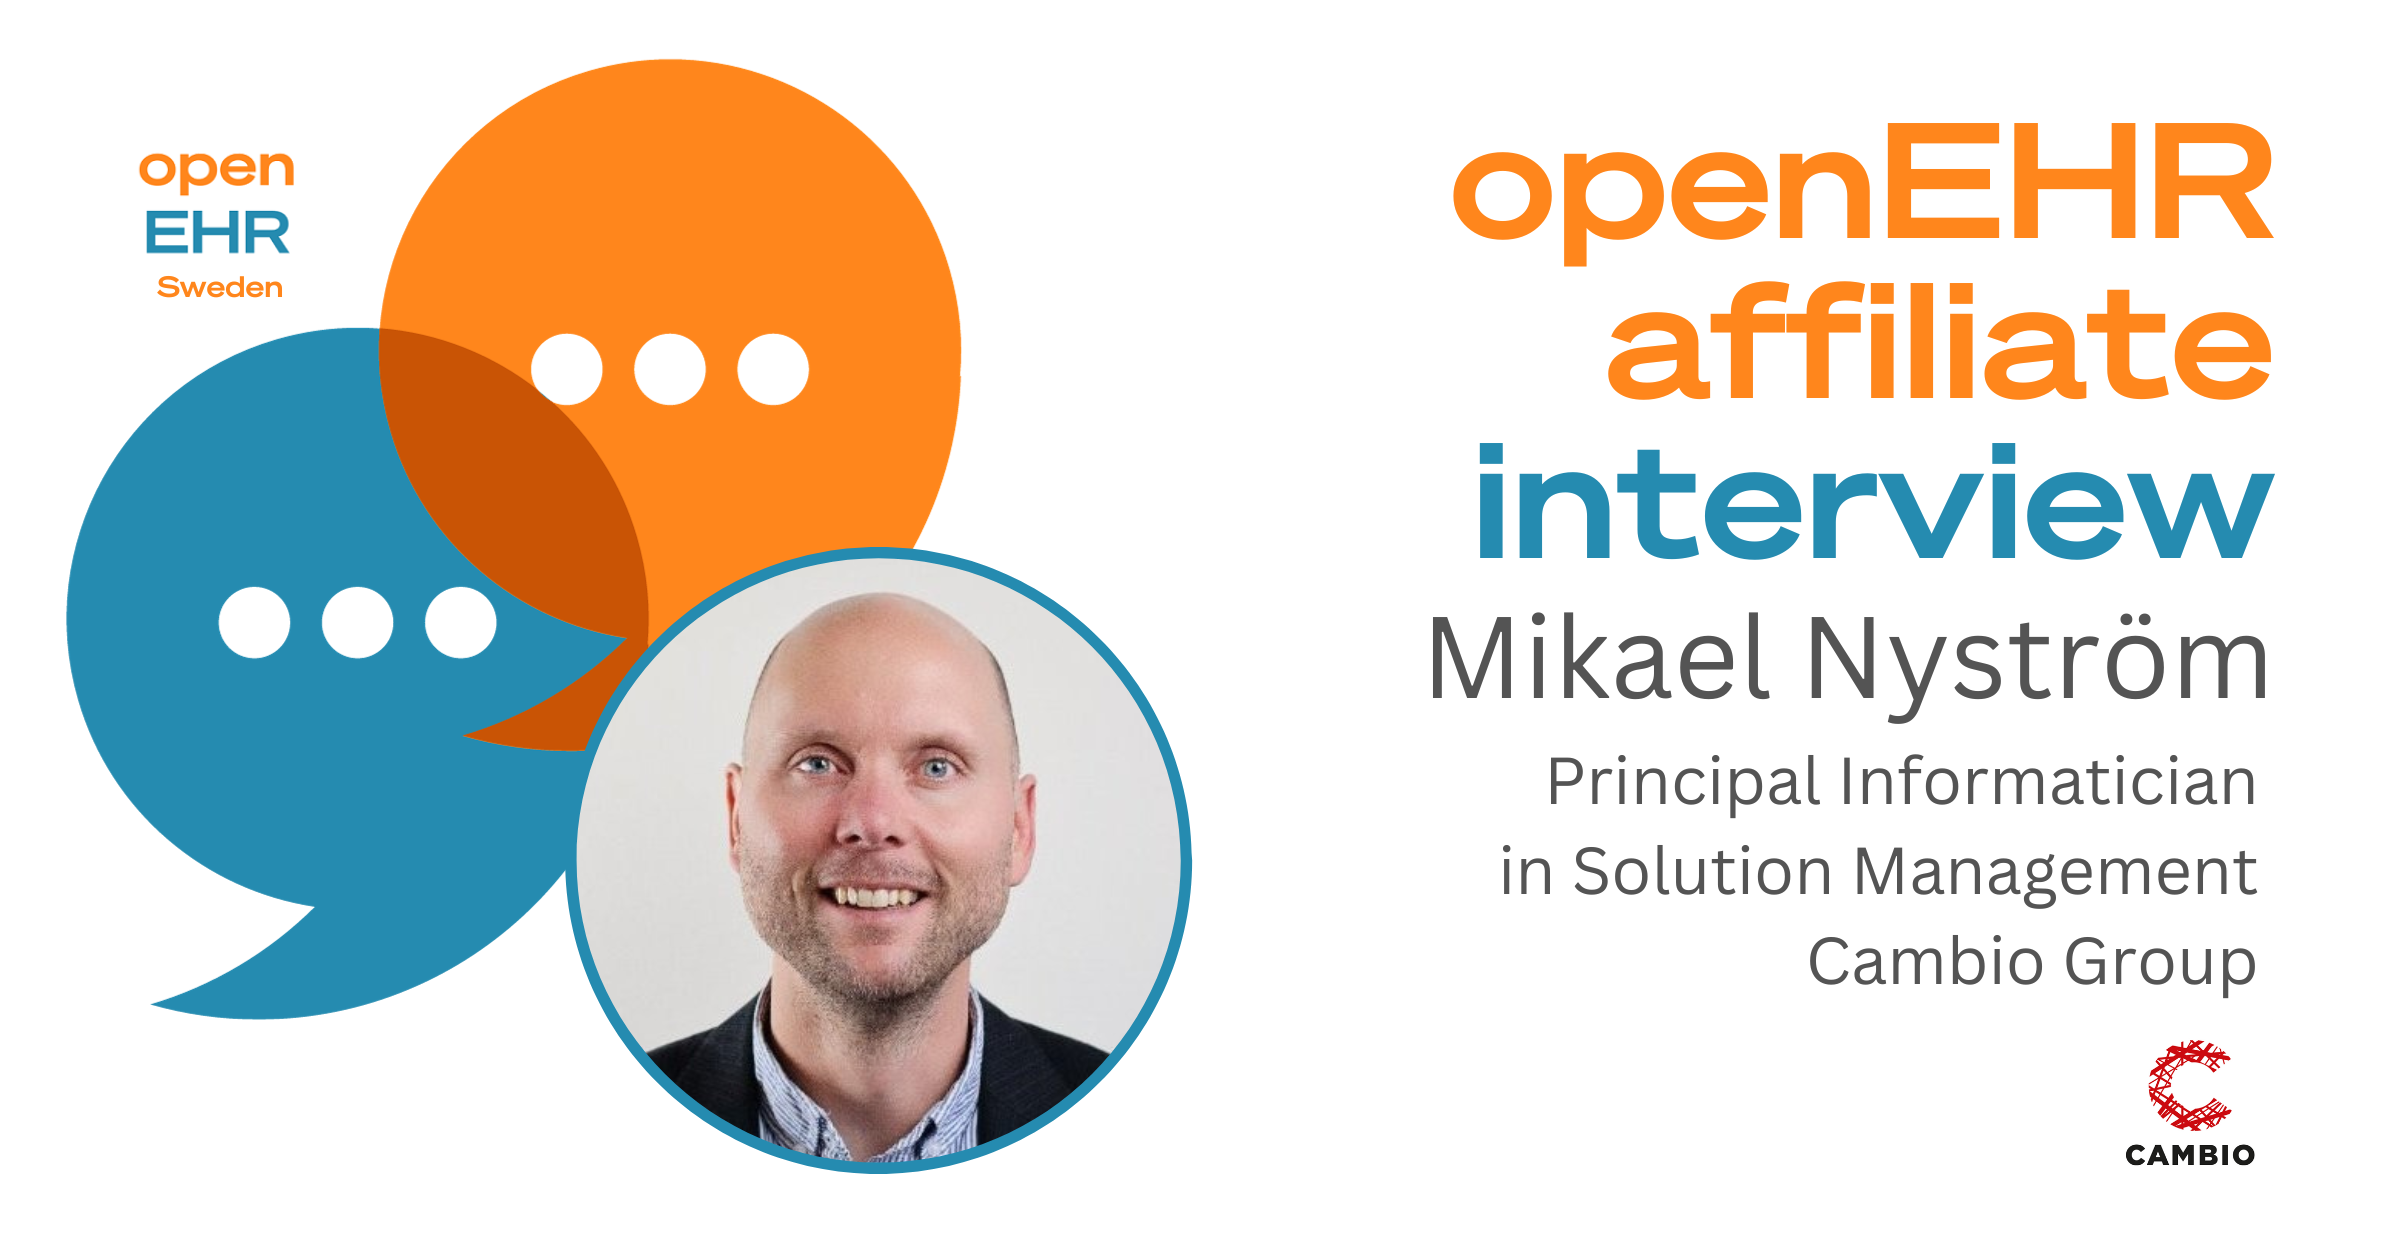 Mikael Nyström, Principal Informatician in Solution Management for Cambio, talks about his role within the openEHR Sweden affiliate